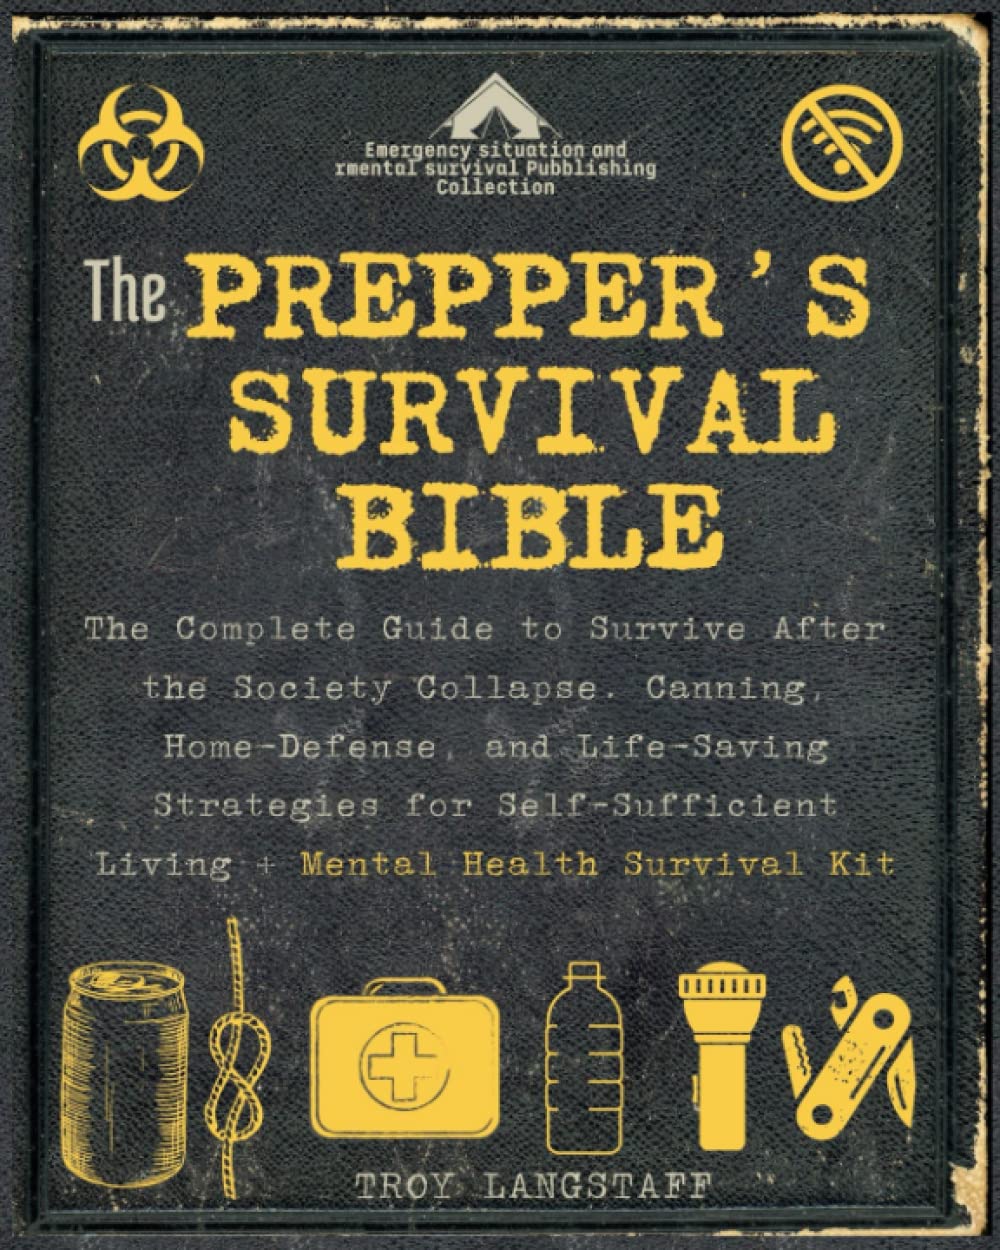 The Prepper’s Survival Bible: 8 Books in 1: The Guide to Survive After the Society Collapse. Canning, Home-Defense, Life-Saving Strategies for Self-Sufficient Living + Mental Health Survival Kit